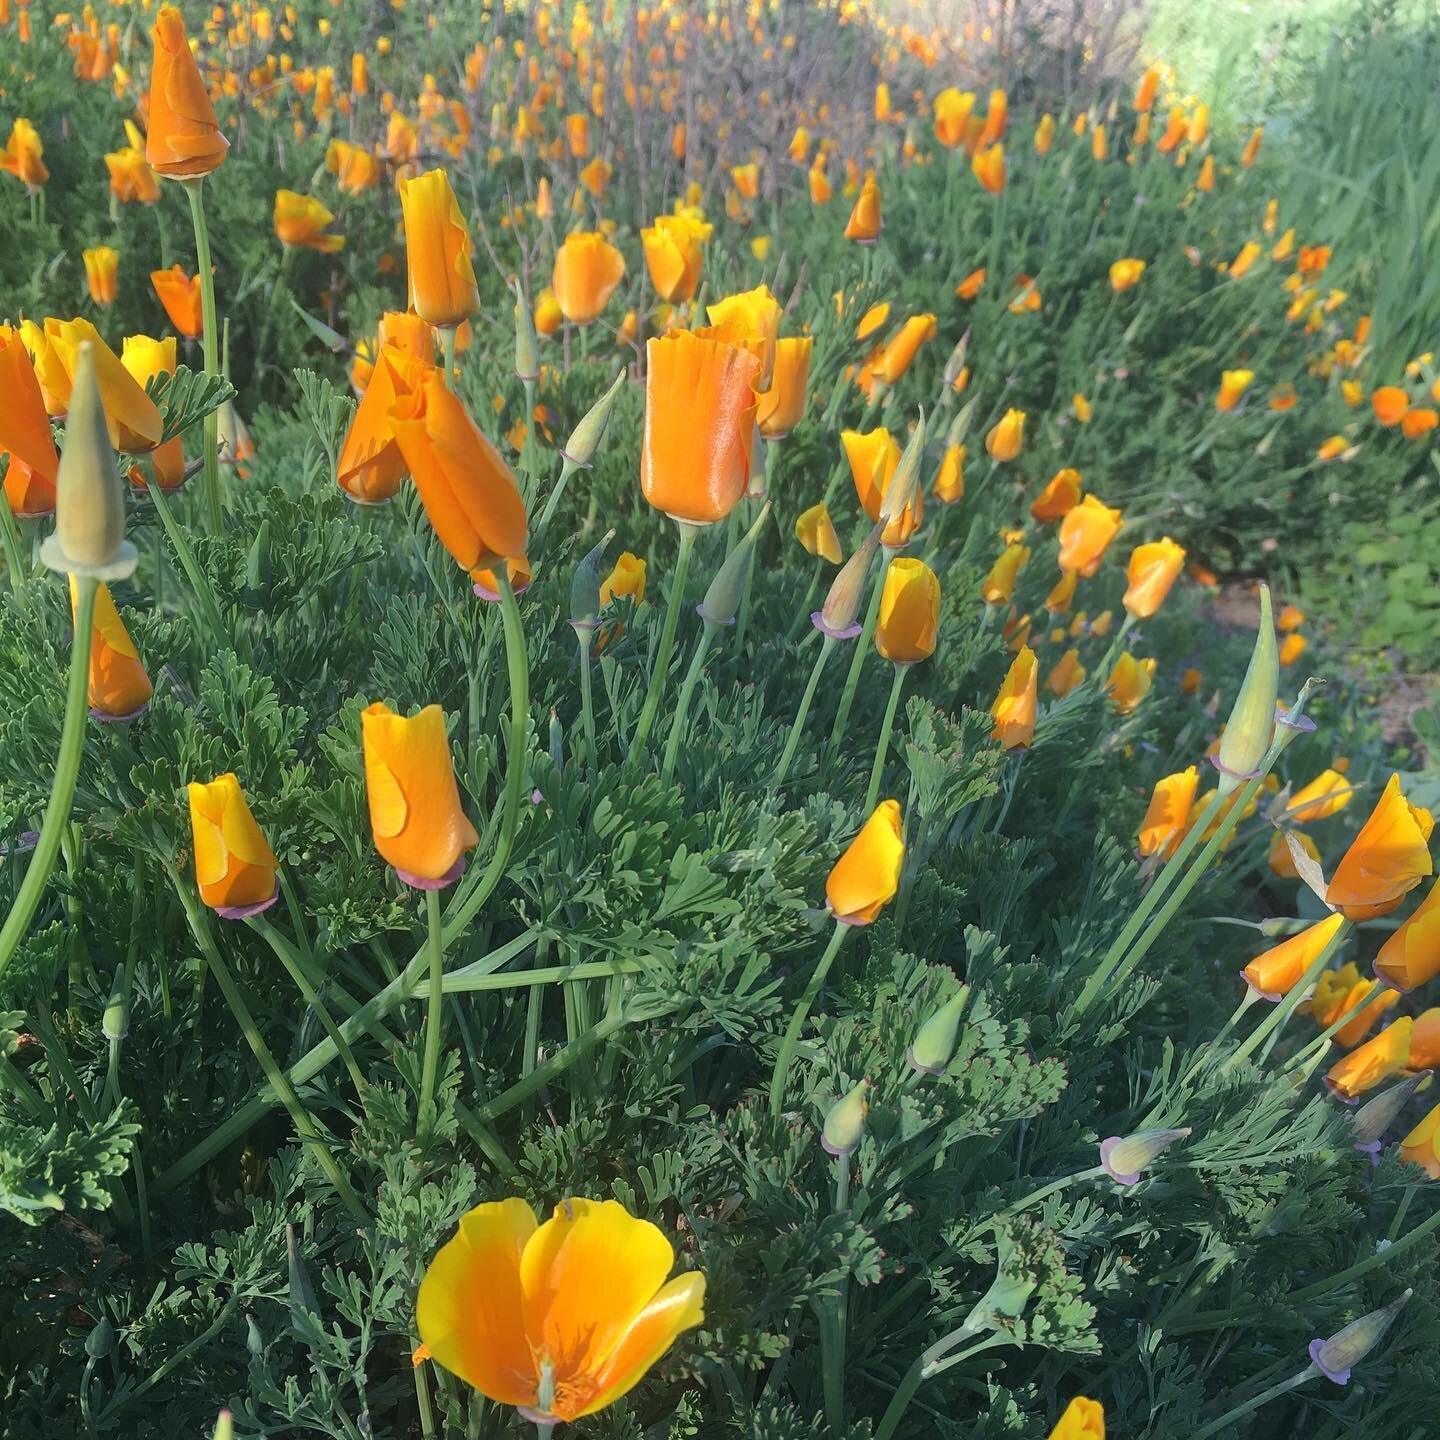 More spring looks: poppies everywhere, cover crop growing lush, mugwort already towering.